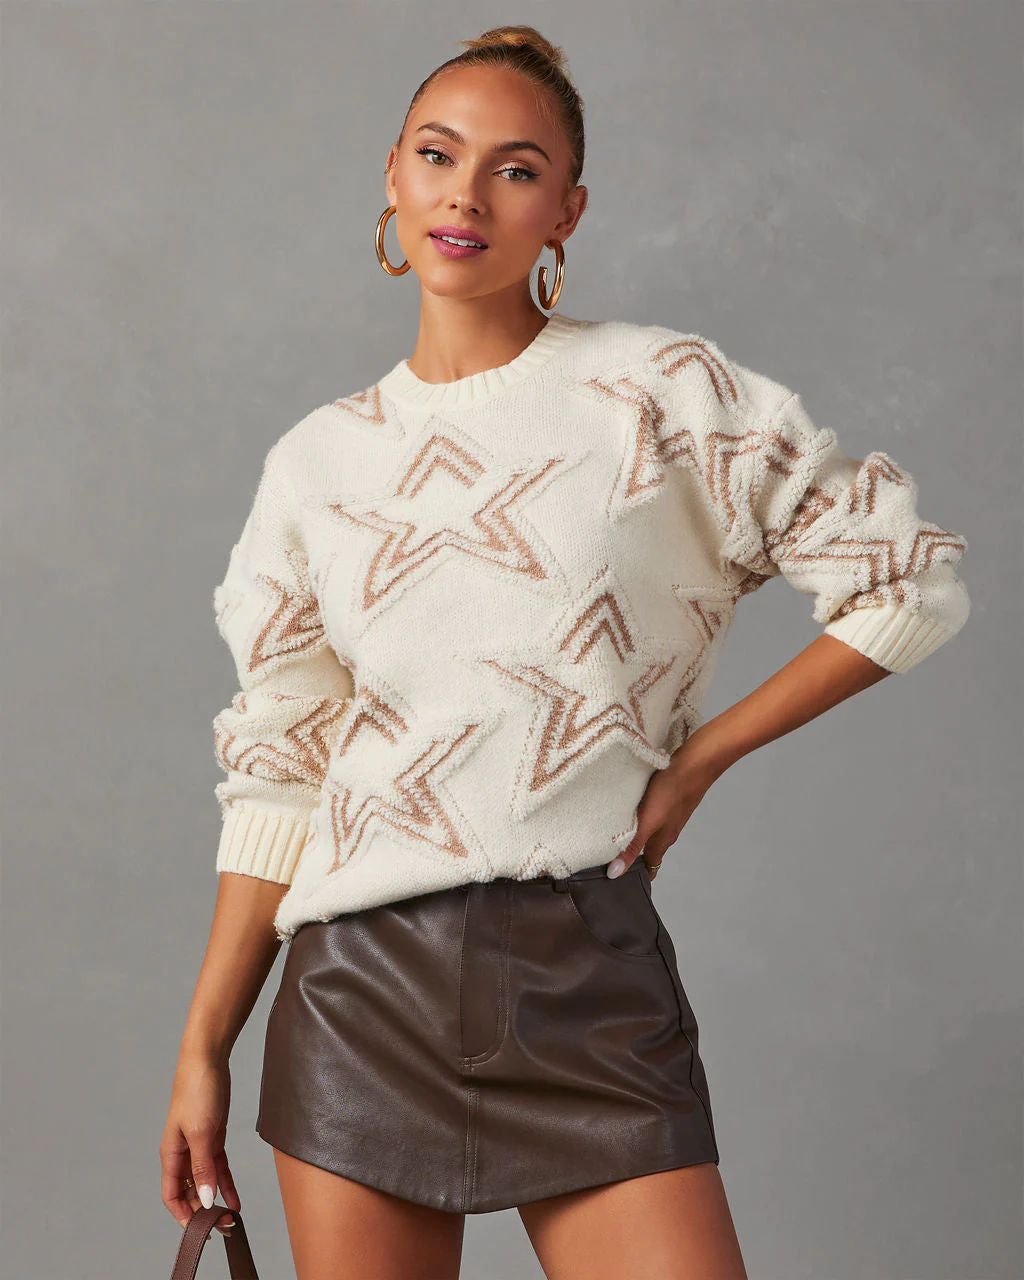 Celestial Chic Star Embossed Sweater | VICI Collection